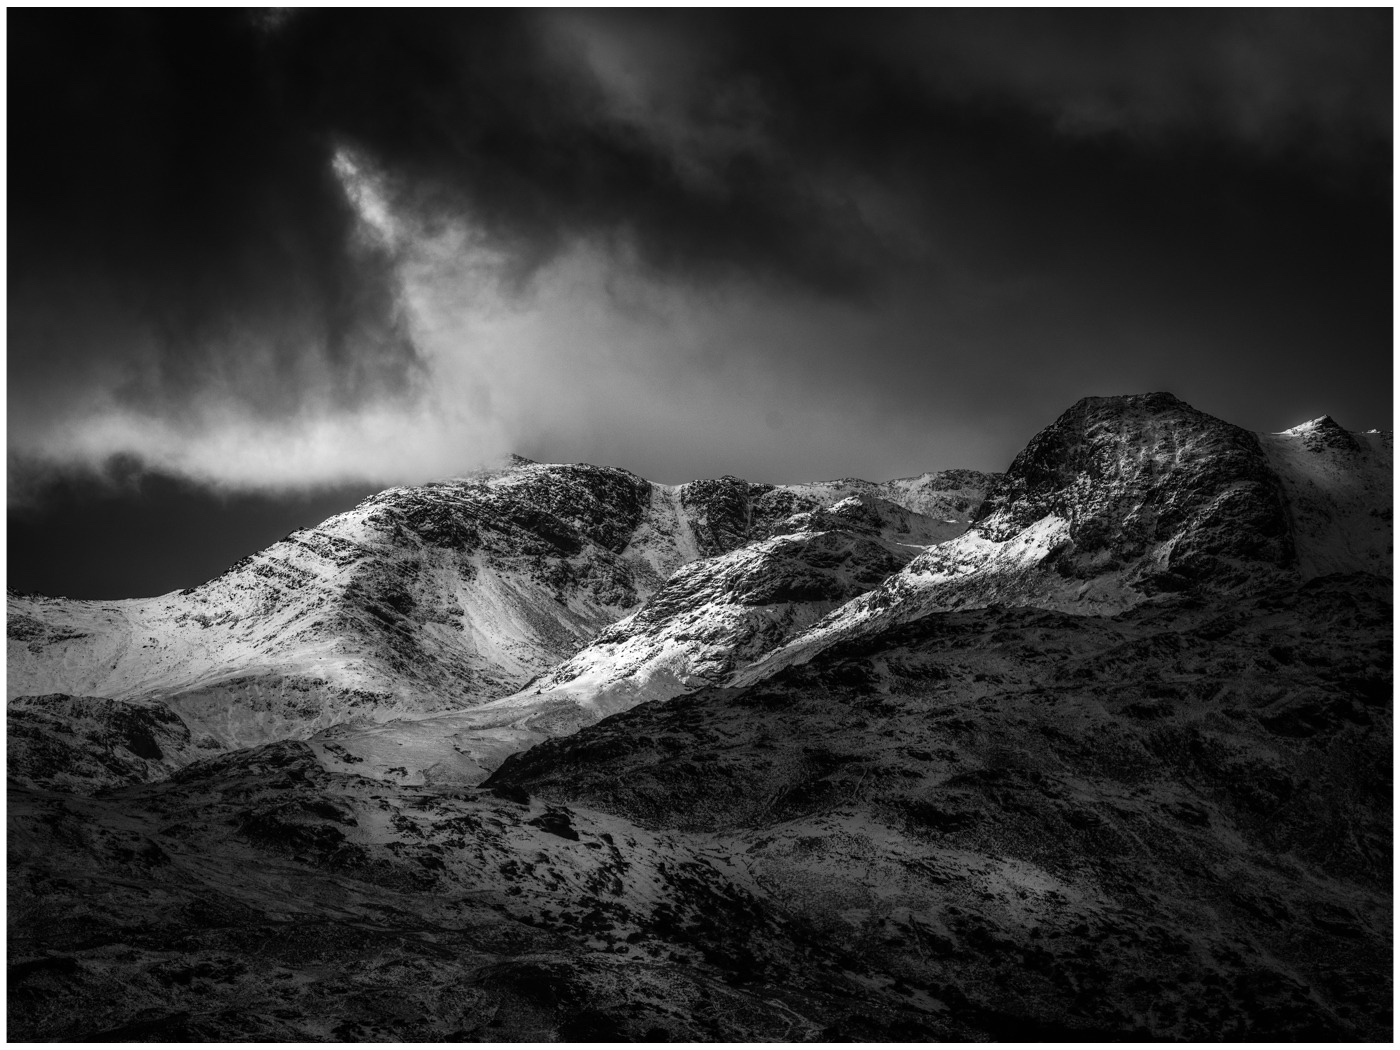 Lake District Storm Brewing by Steve Miles ARPS